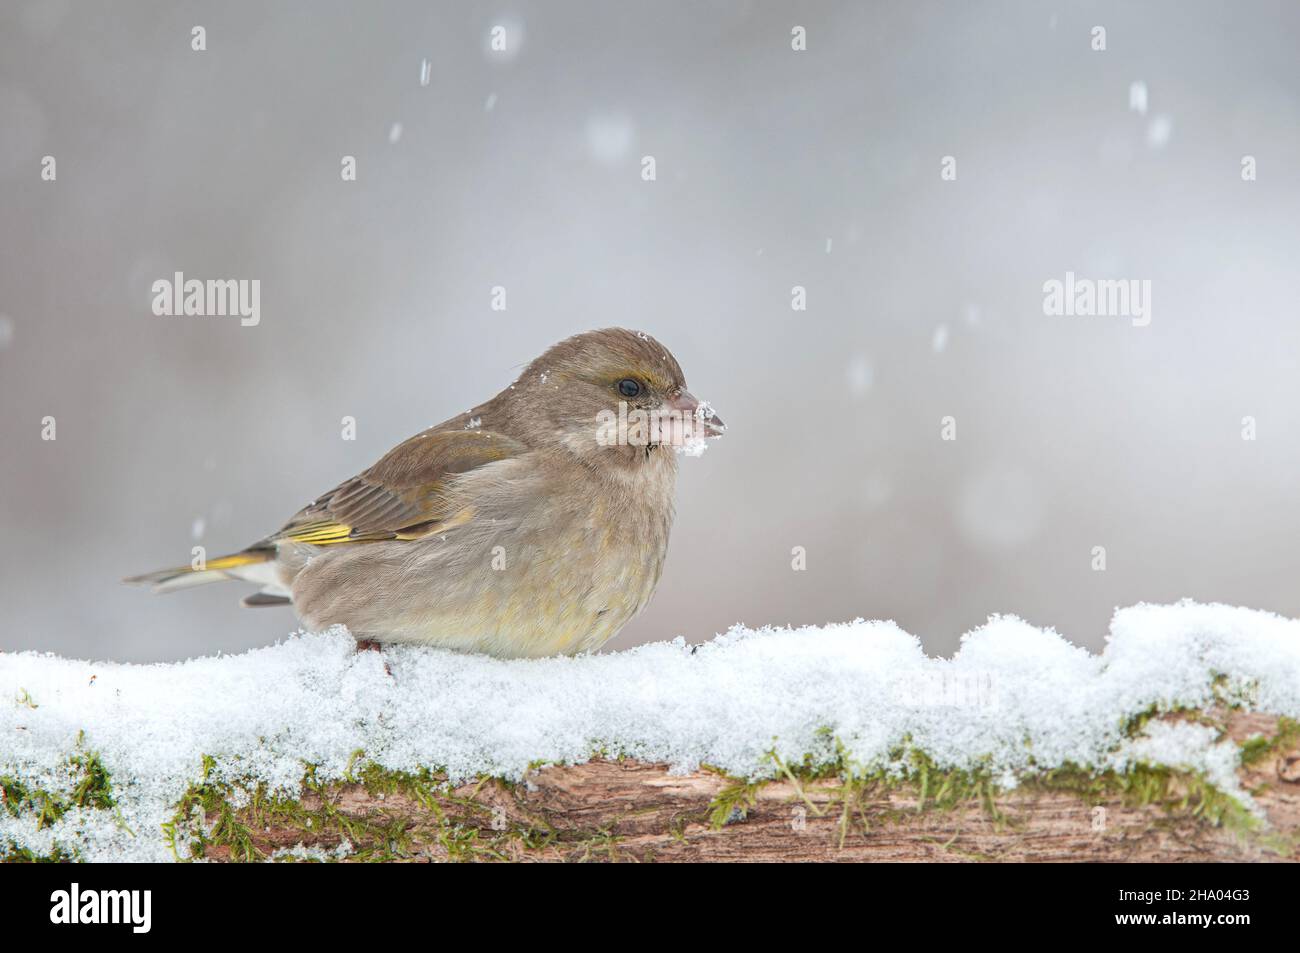 Greenfinch standing on snow covered branch during snowfall Stock Photo